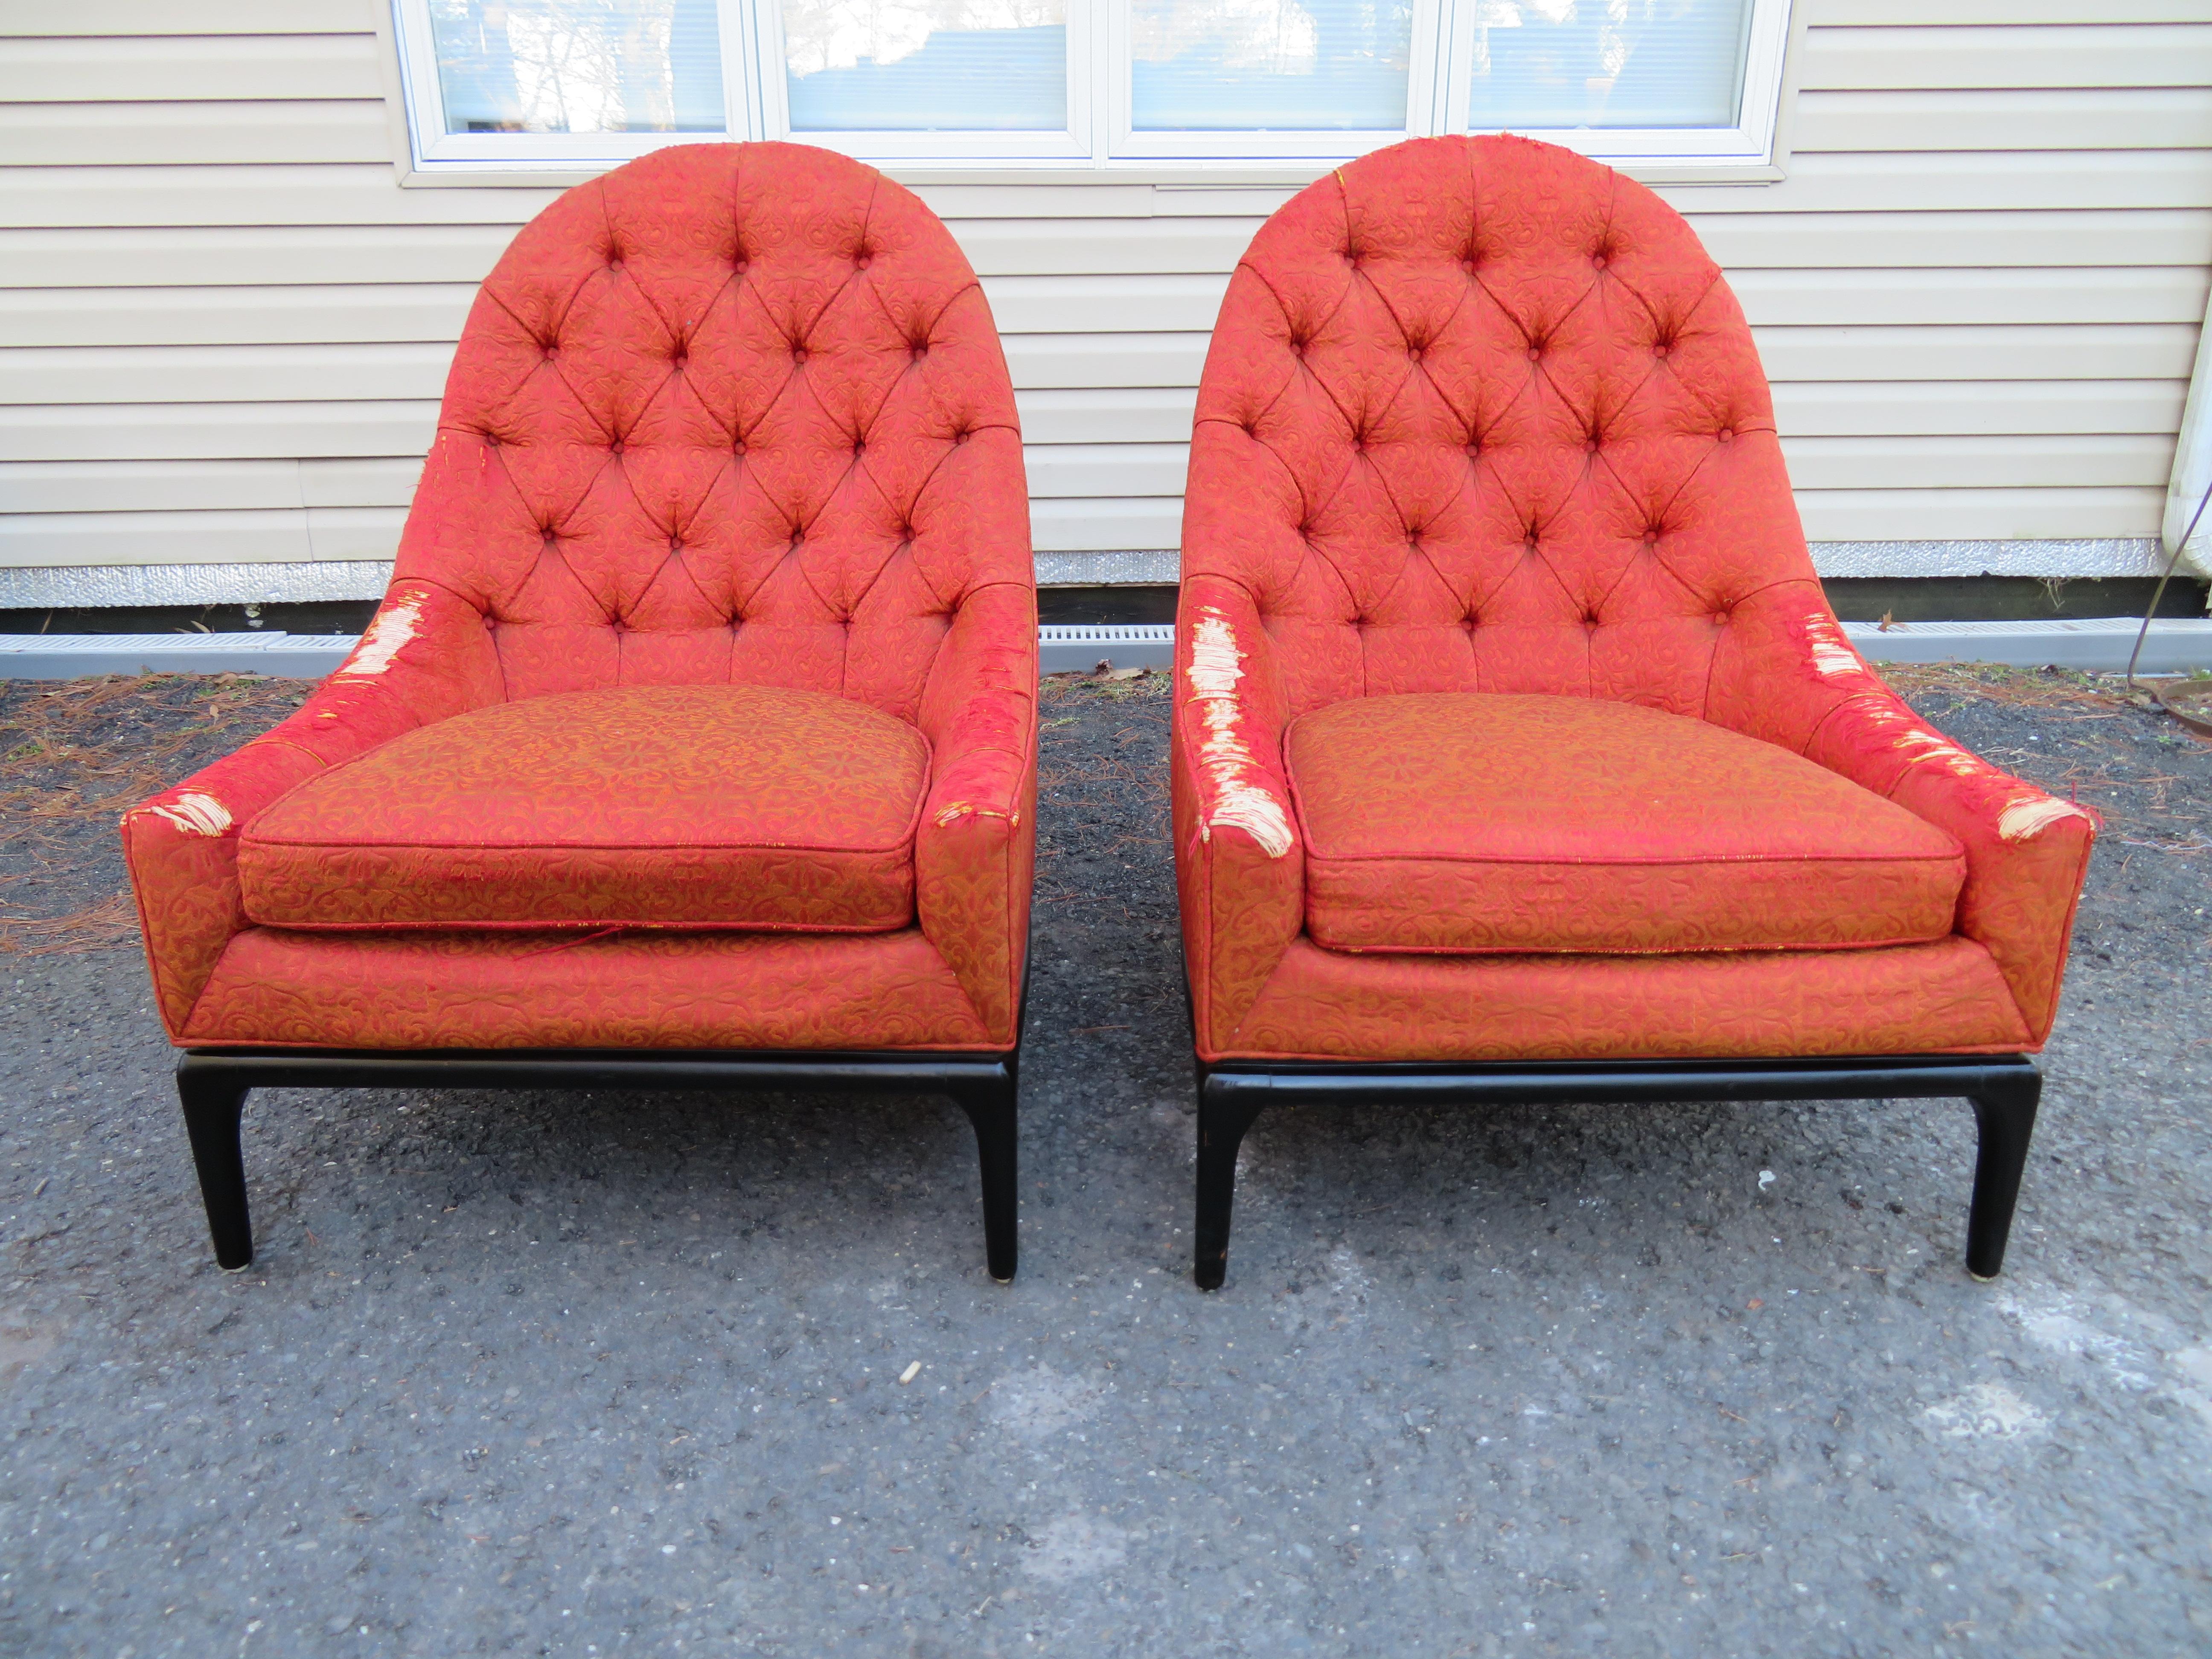 Sexy pair of Robsjohn Gibbings style tufted back slipper chairs. We love the look of the sleek tufted spoon backs resting on the well crafted ebonized frames-very sophisticated! They measure 38